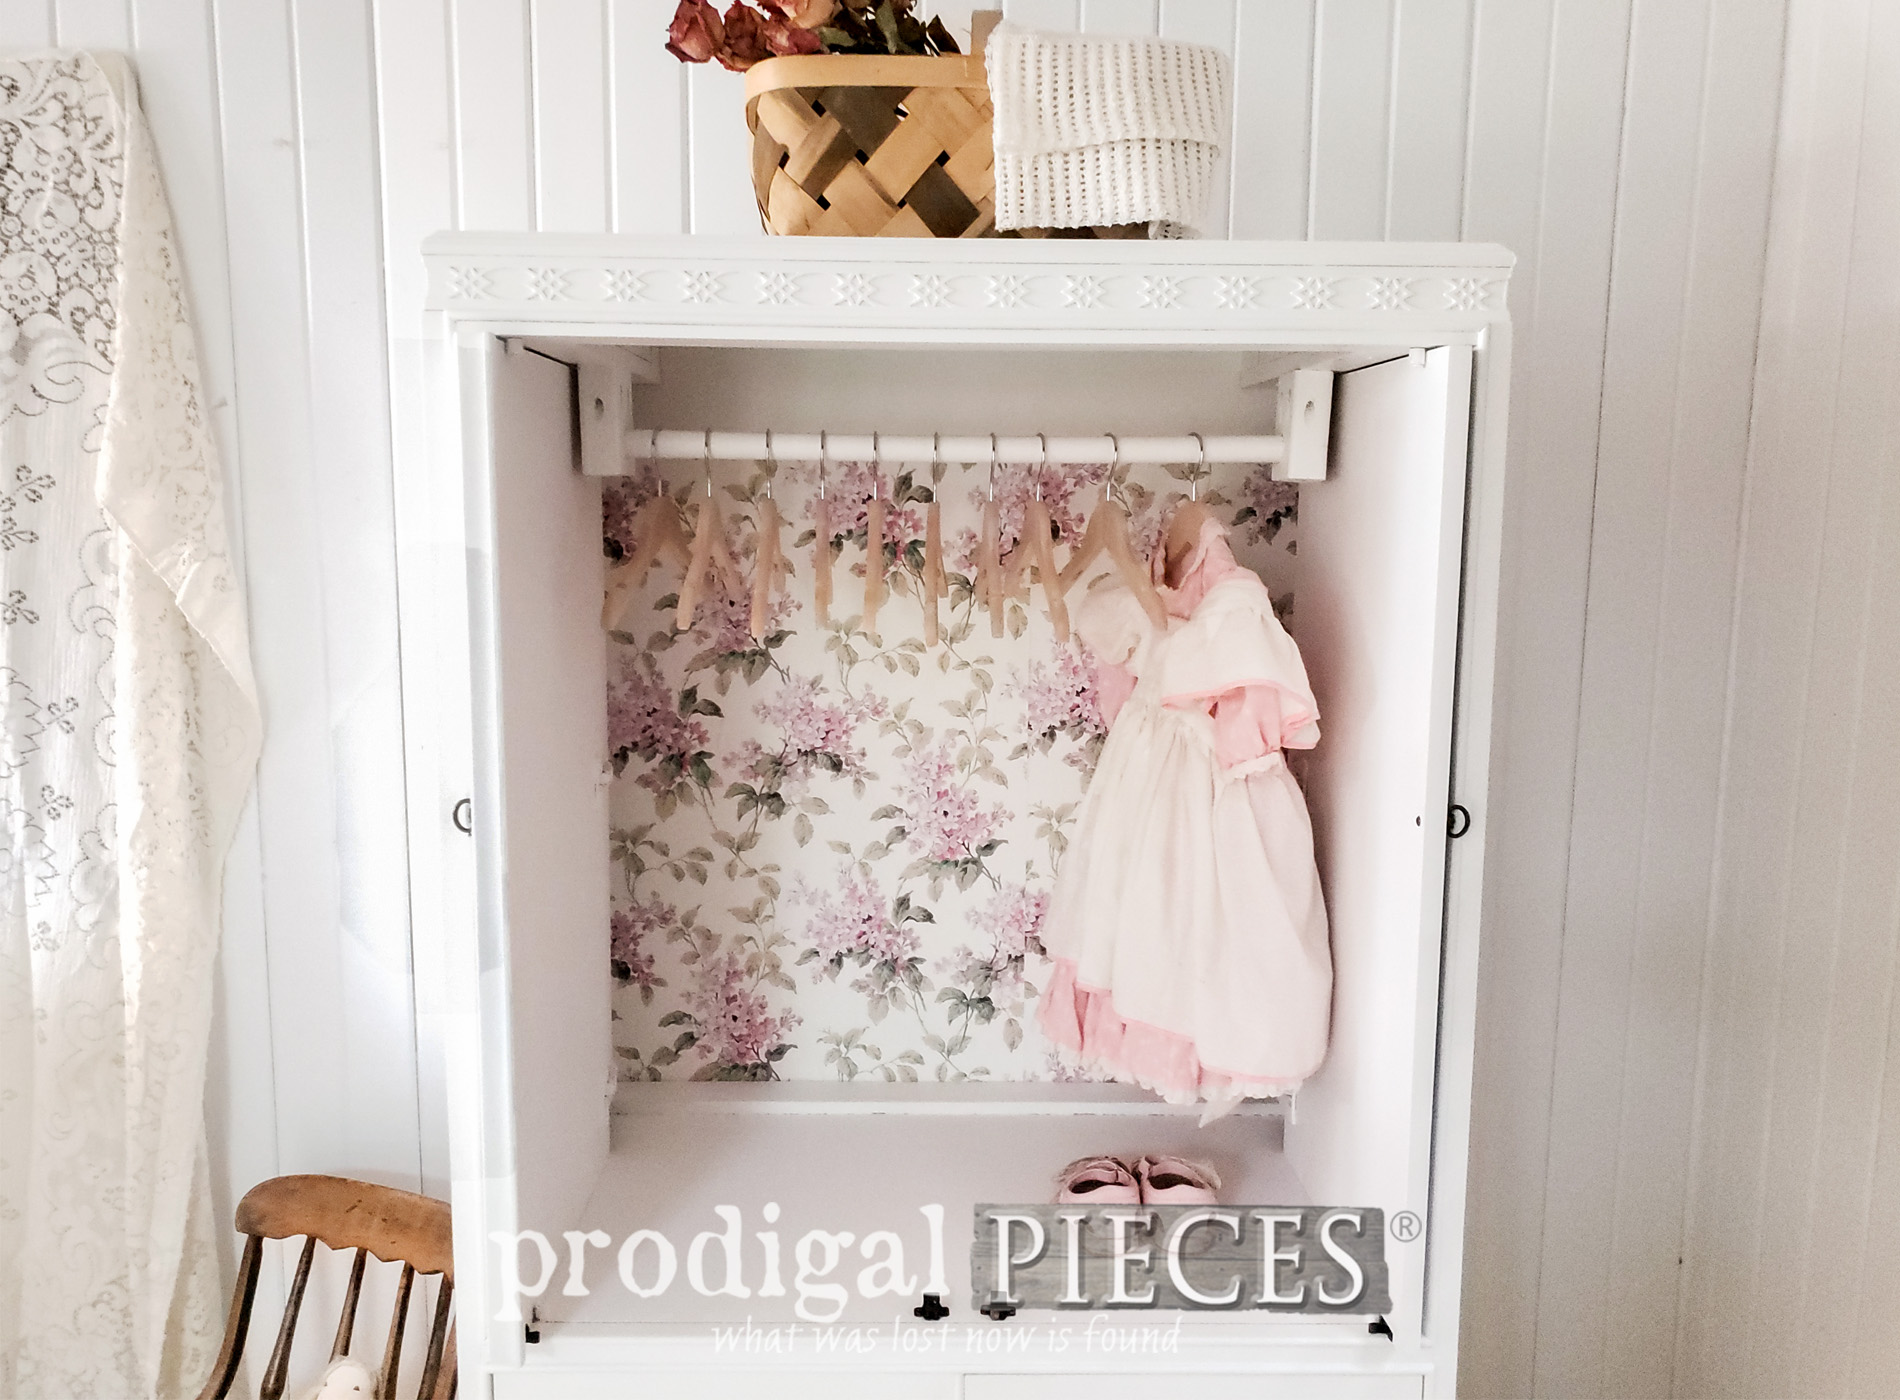 Featured Upcycled Entertainment Center turned into Child's Wardrobe by Larissa of Prodigal Pieces | prodigalpieces.com #prodigalpieces #furniture #diy #home #homedecor #kids #nursery